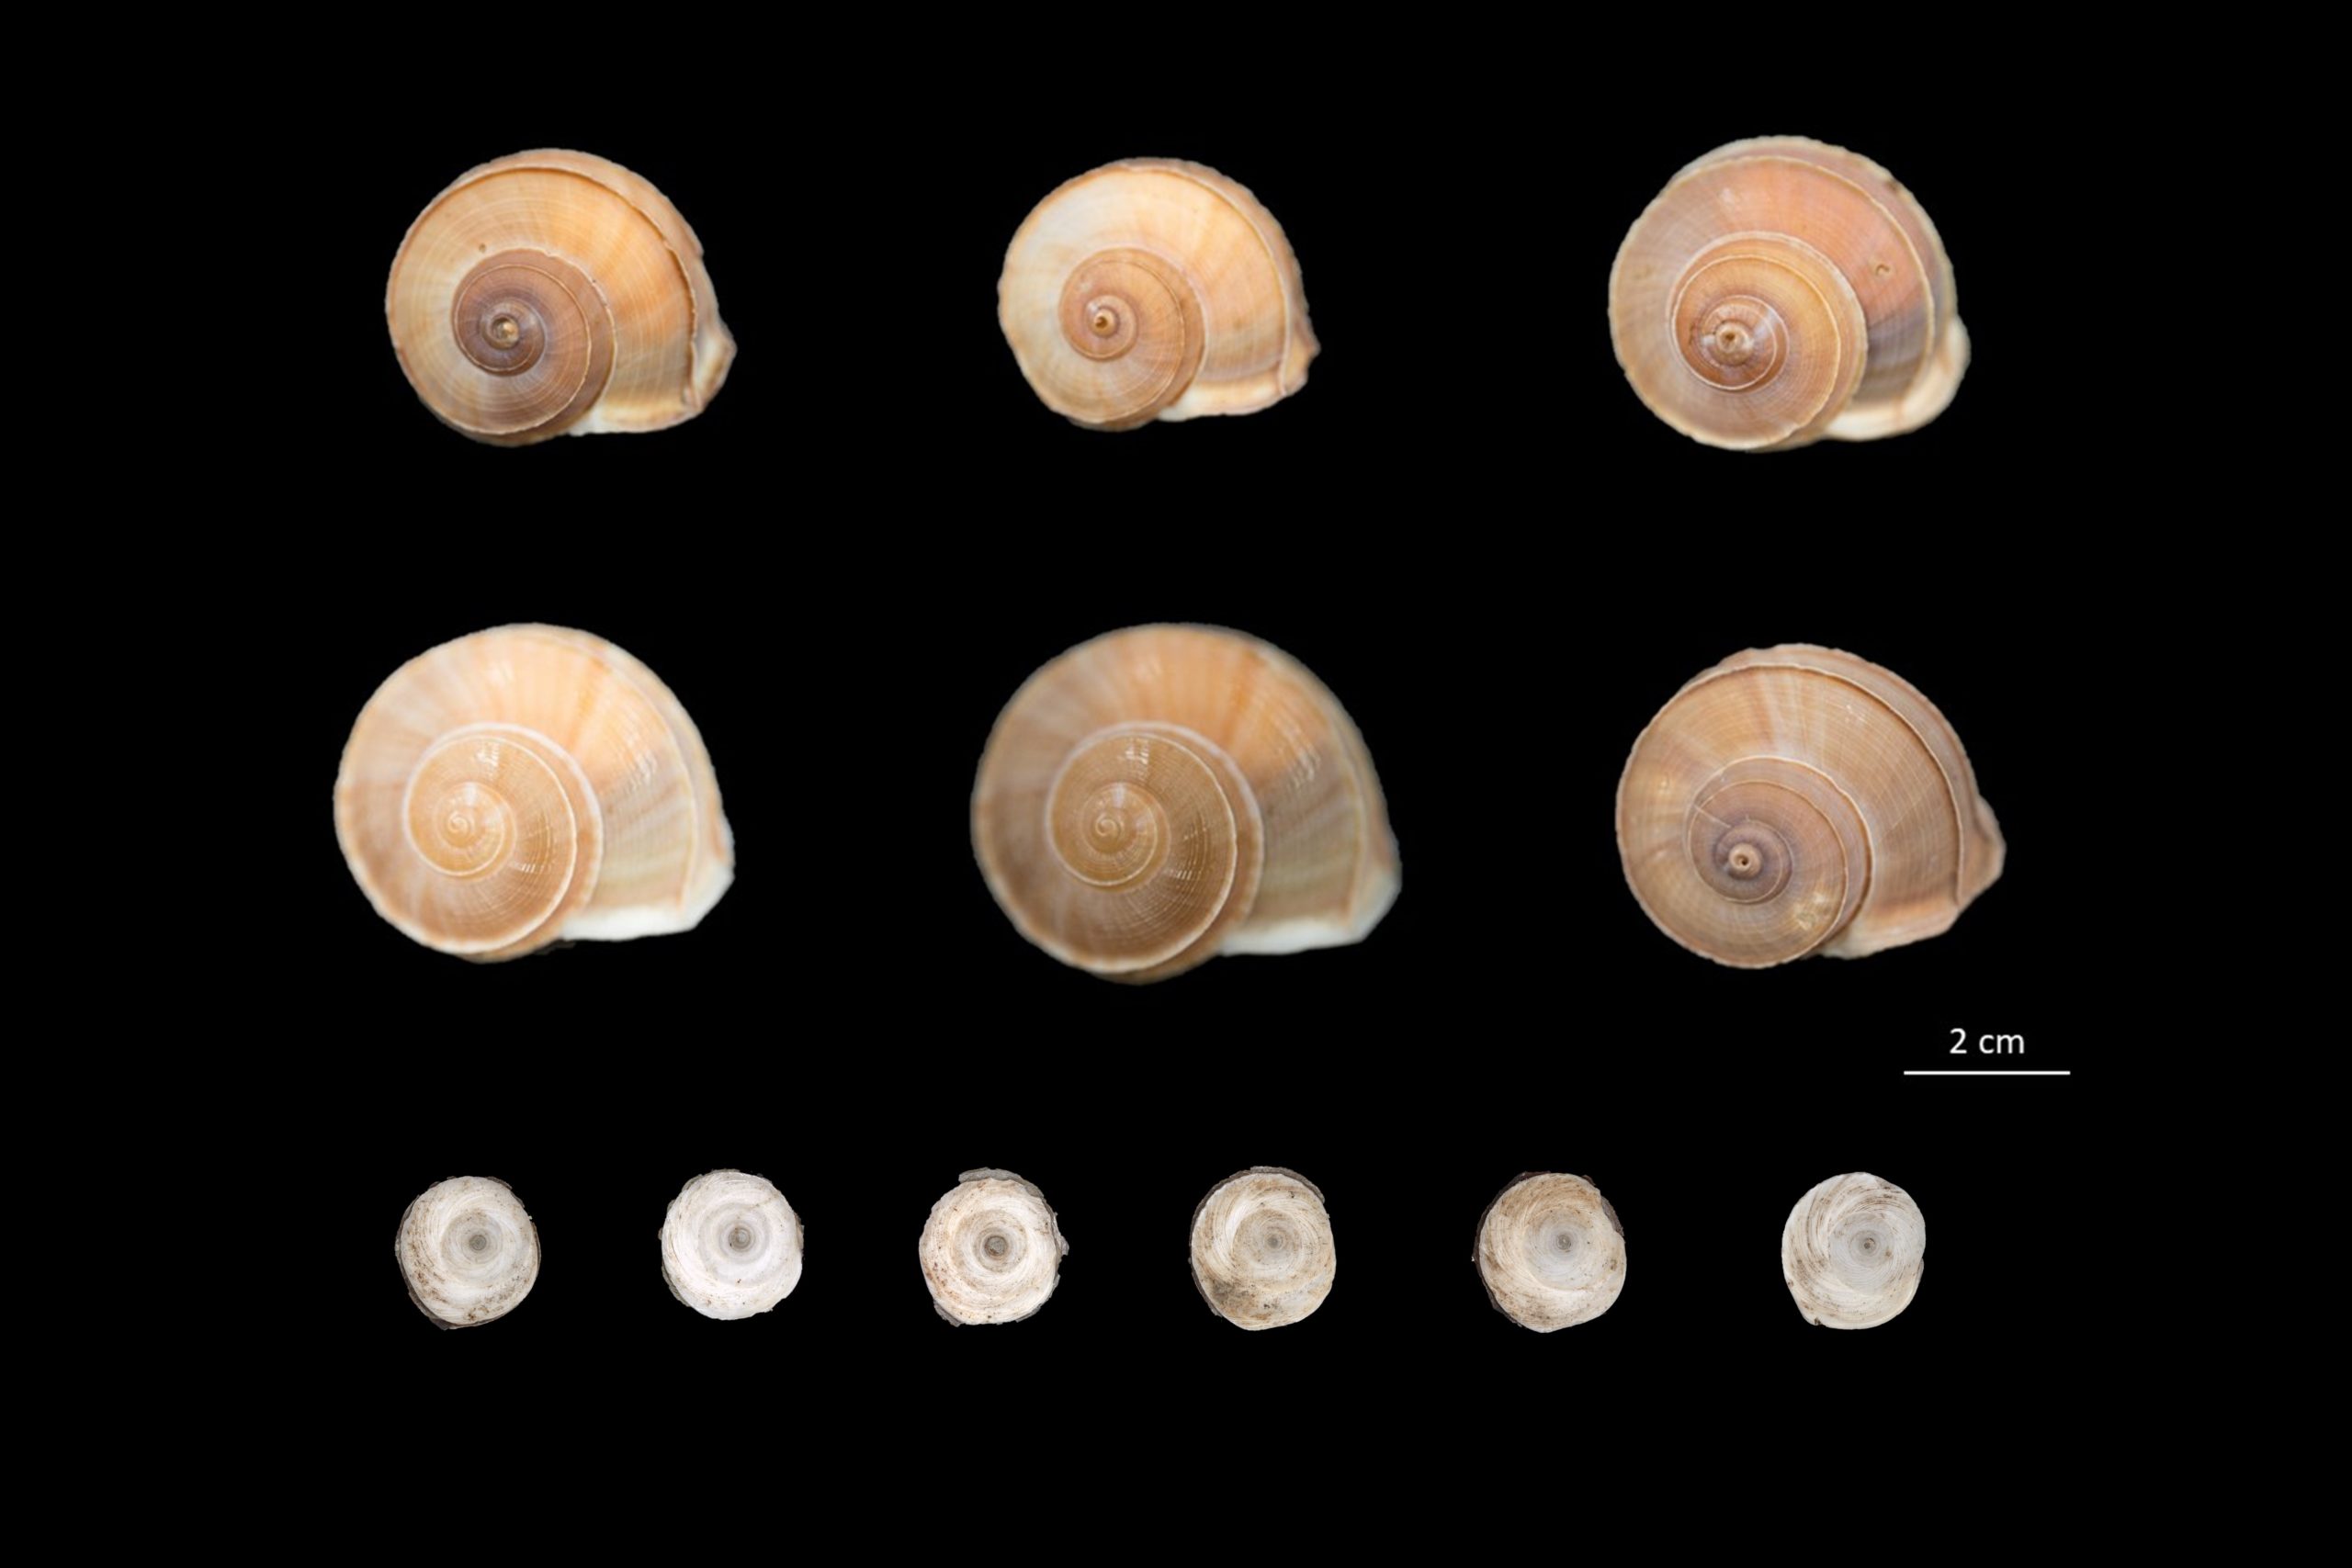 Photograph illustrating terrestrial snails with spiral shells in a light to dark brown color and small cream opercula samples. 